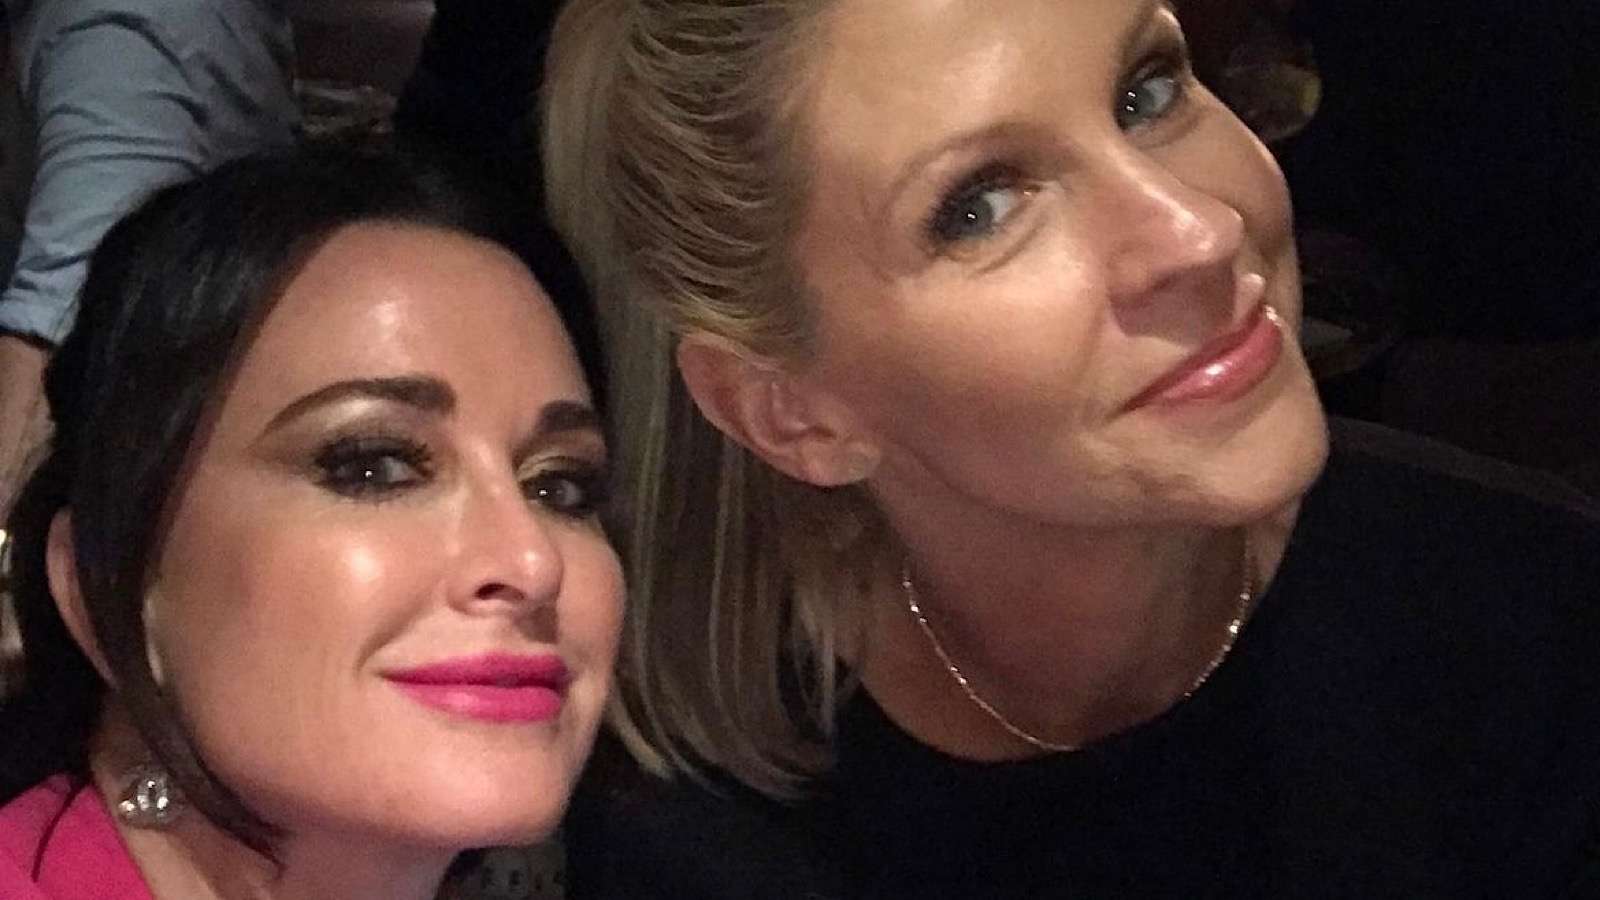 kyle richards and her friend lorene